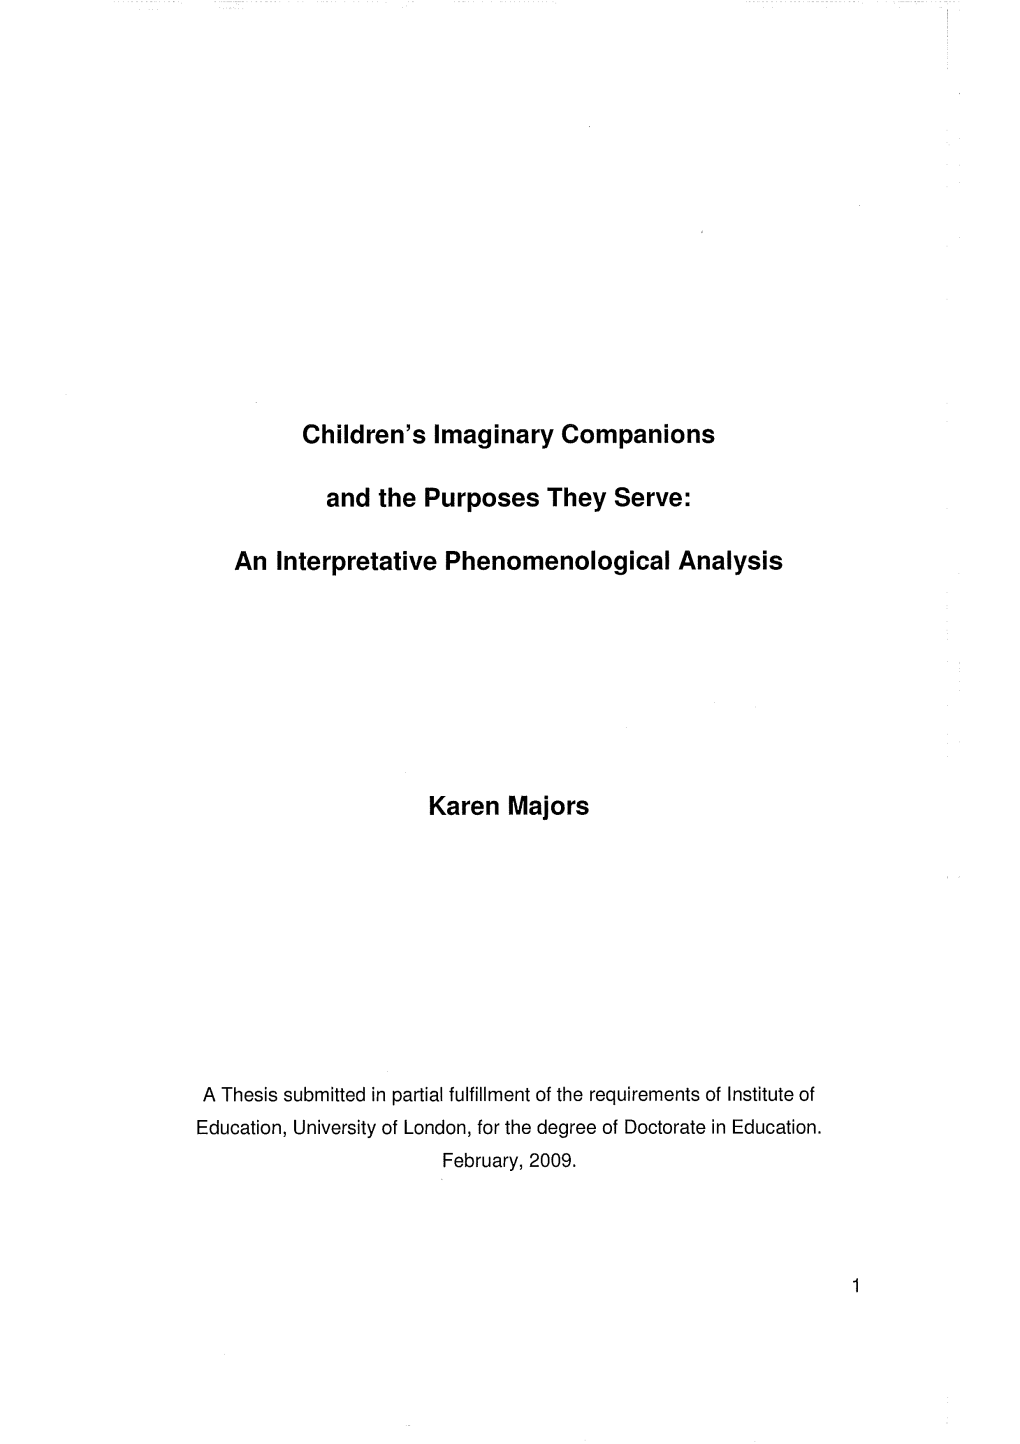 Children's Imaginary Companions and the Purposes They Serve: An